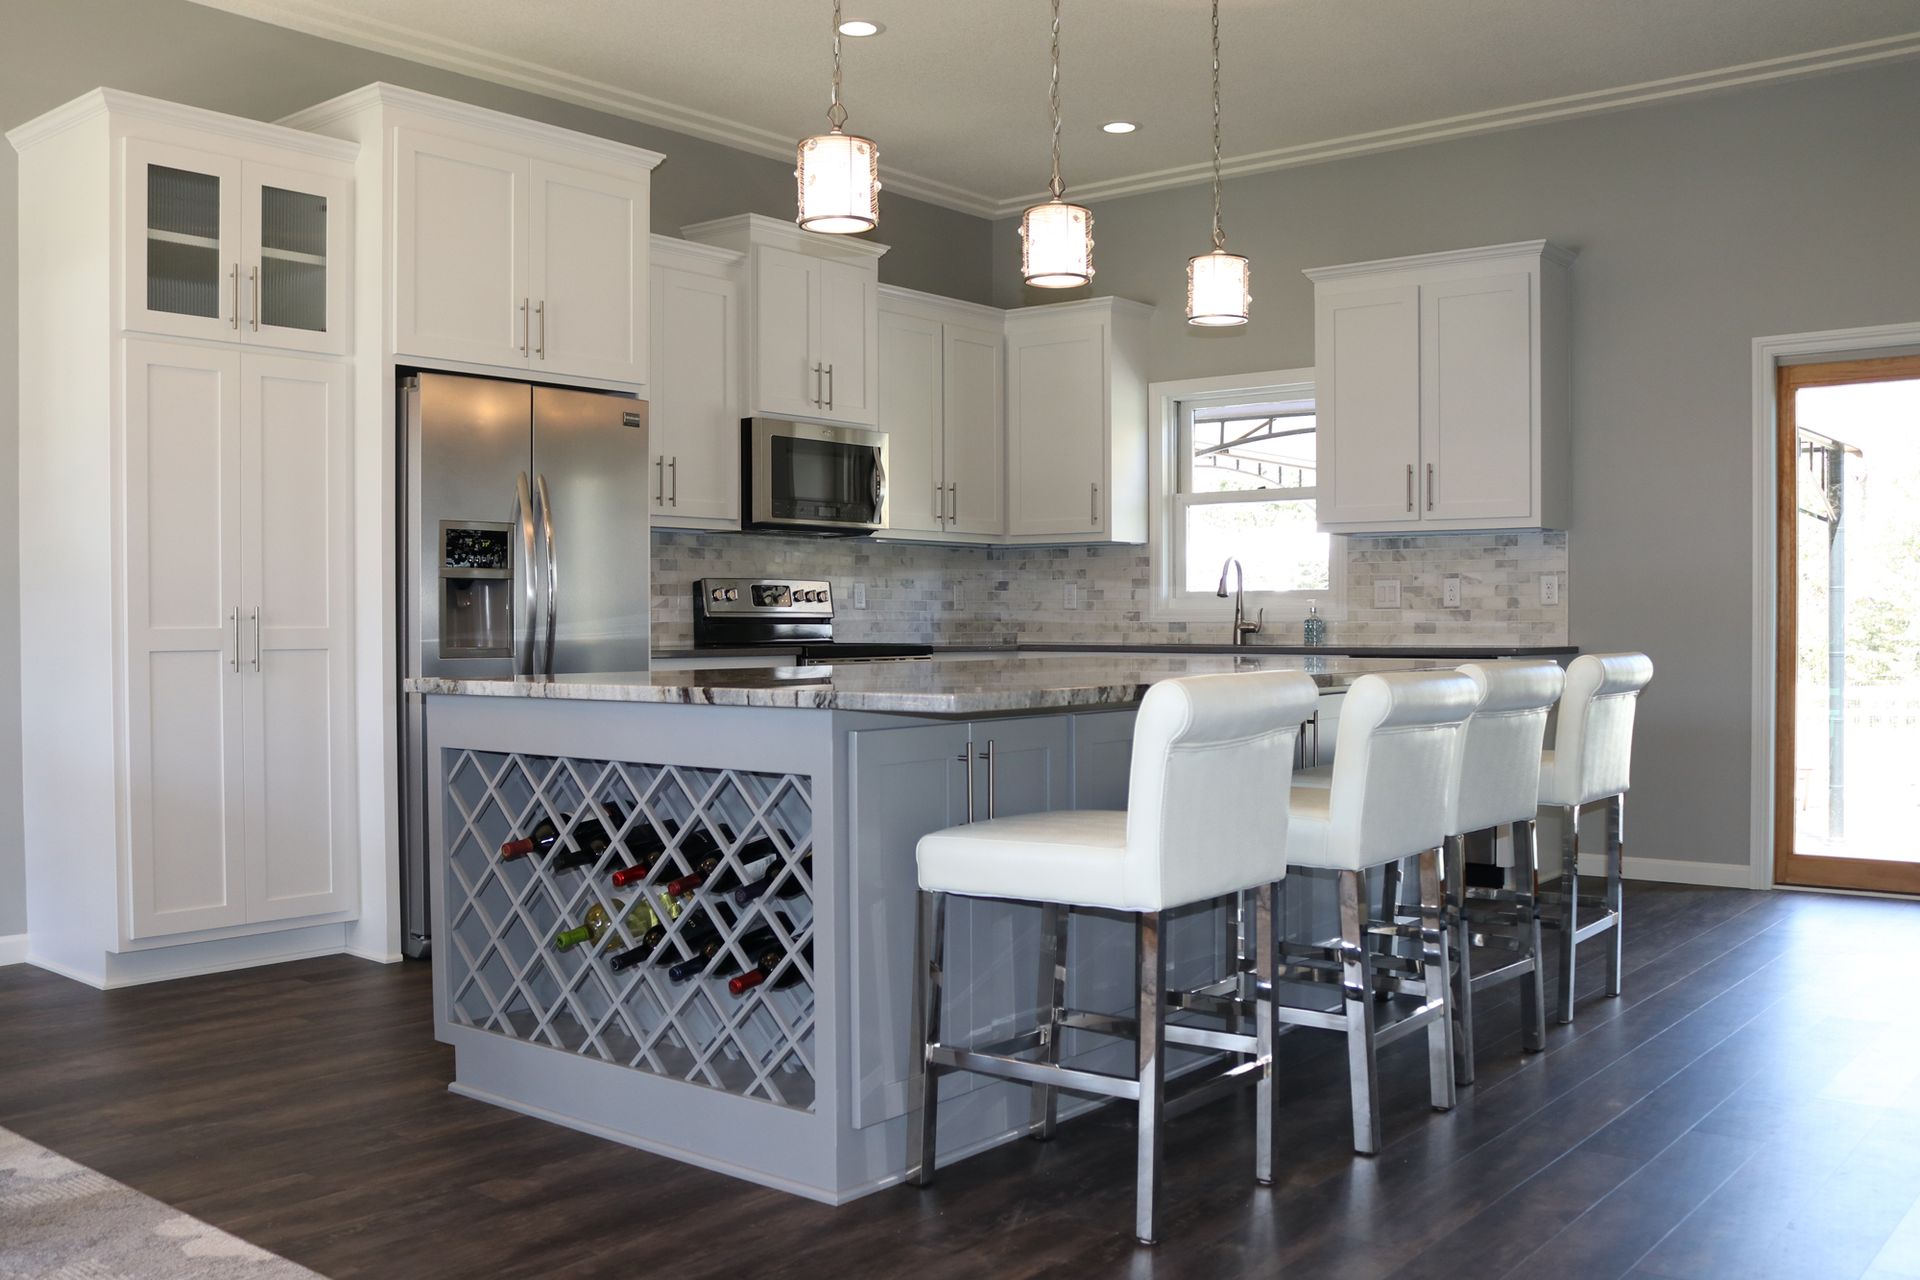 Dercon Construction Timeless Kitchen Remodel and Design Ideas